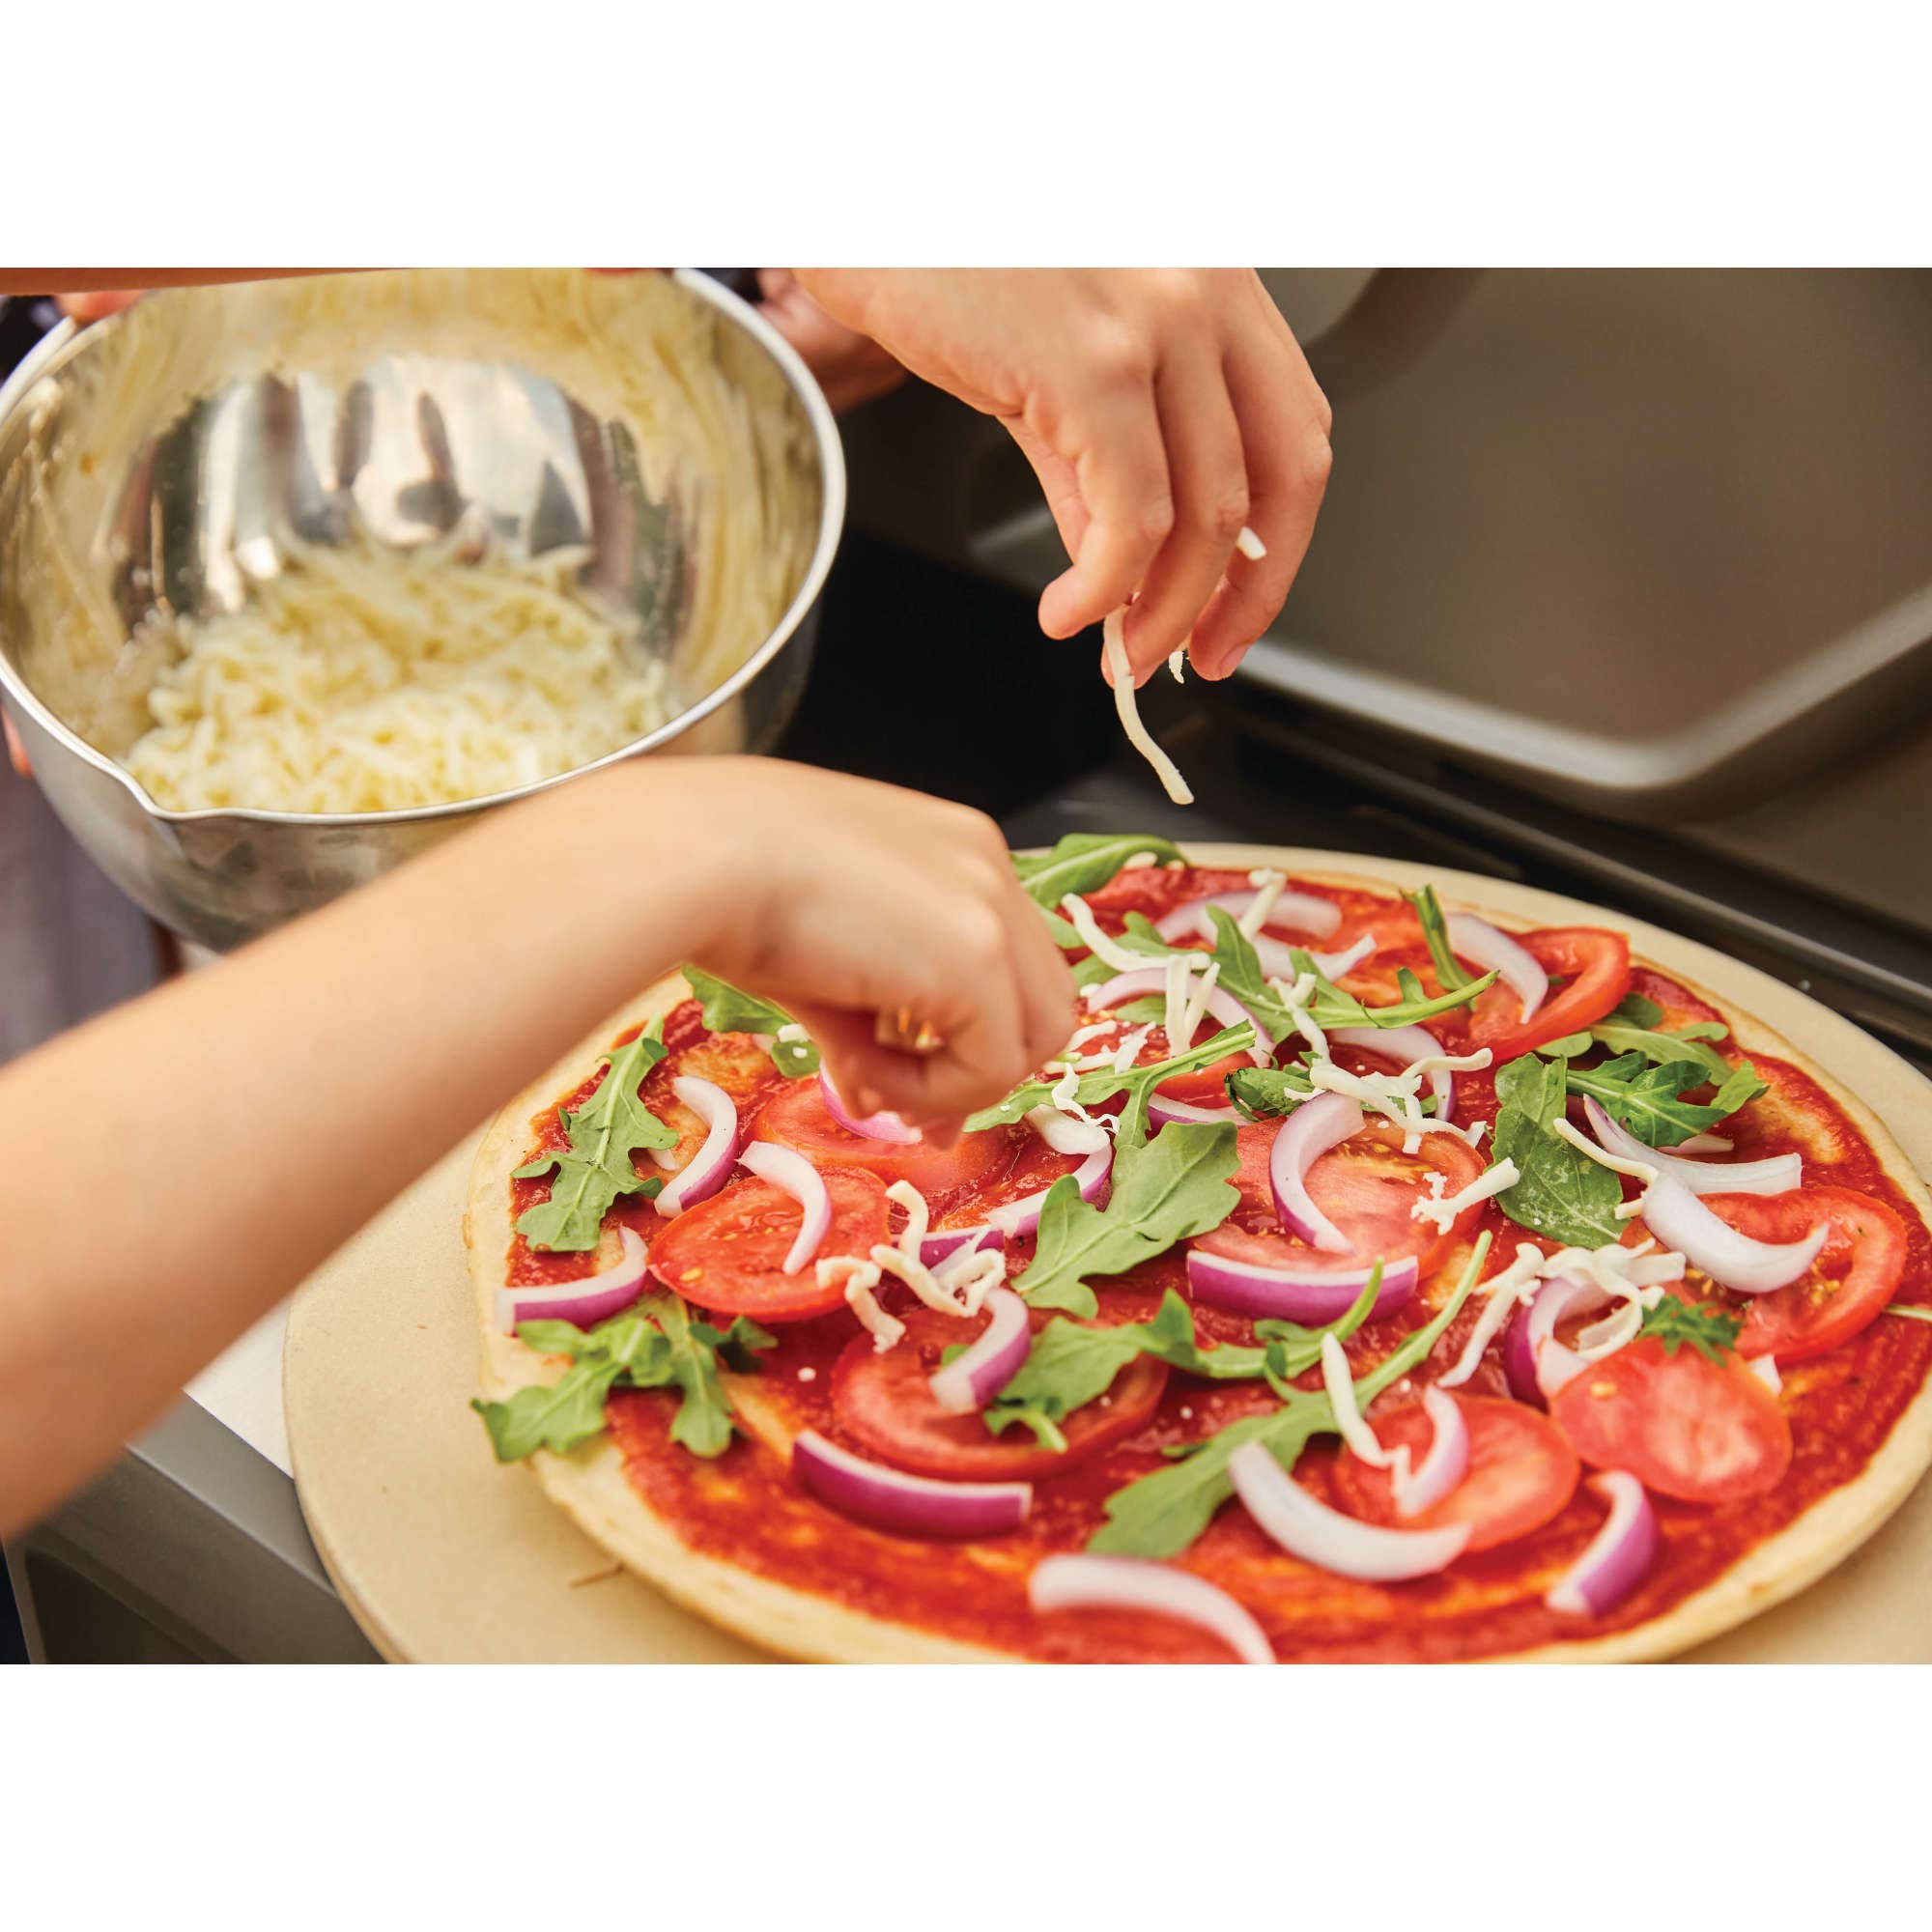 Napoleon Personal Sized Pizza Baking Stone Set - BBQ Grill Accessories, Two 10-inch Personal Pizza Baking Stones, Stone Oven Pizza, Pizzaria Results, Easy To Use, Use In BBQ Grill or Oven